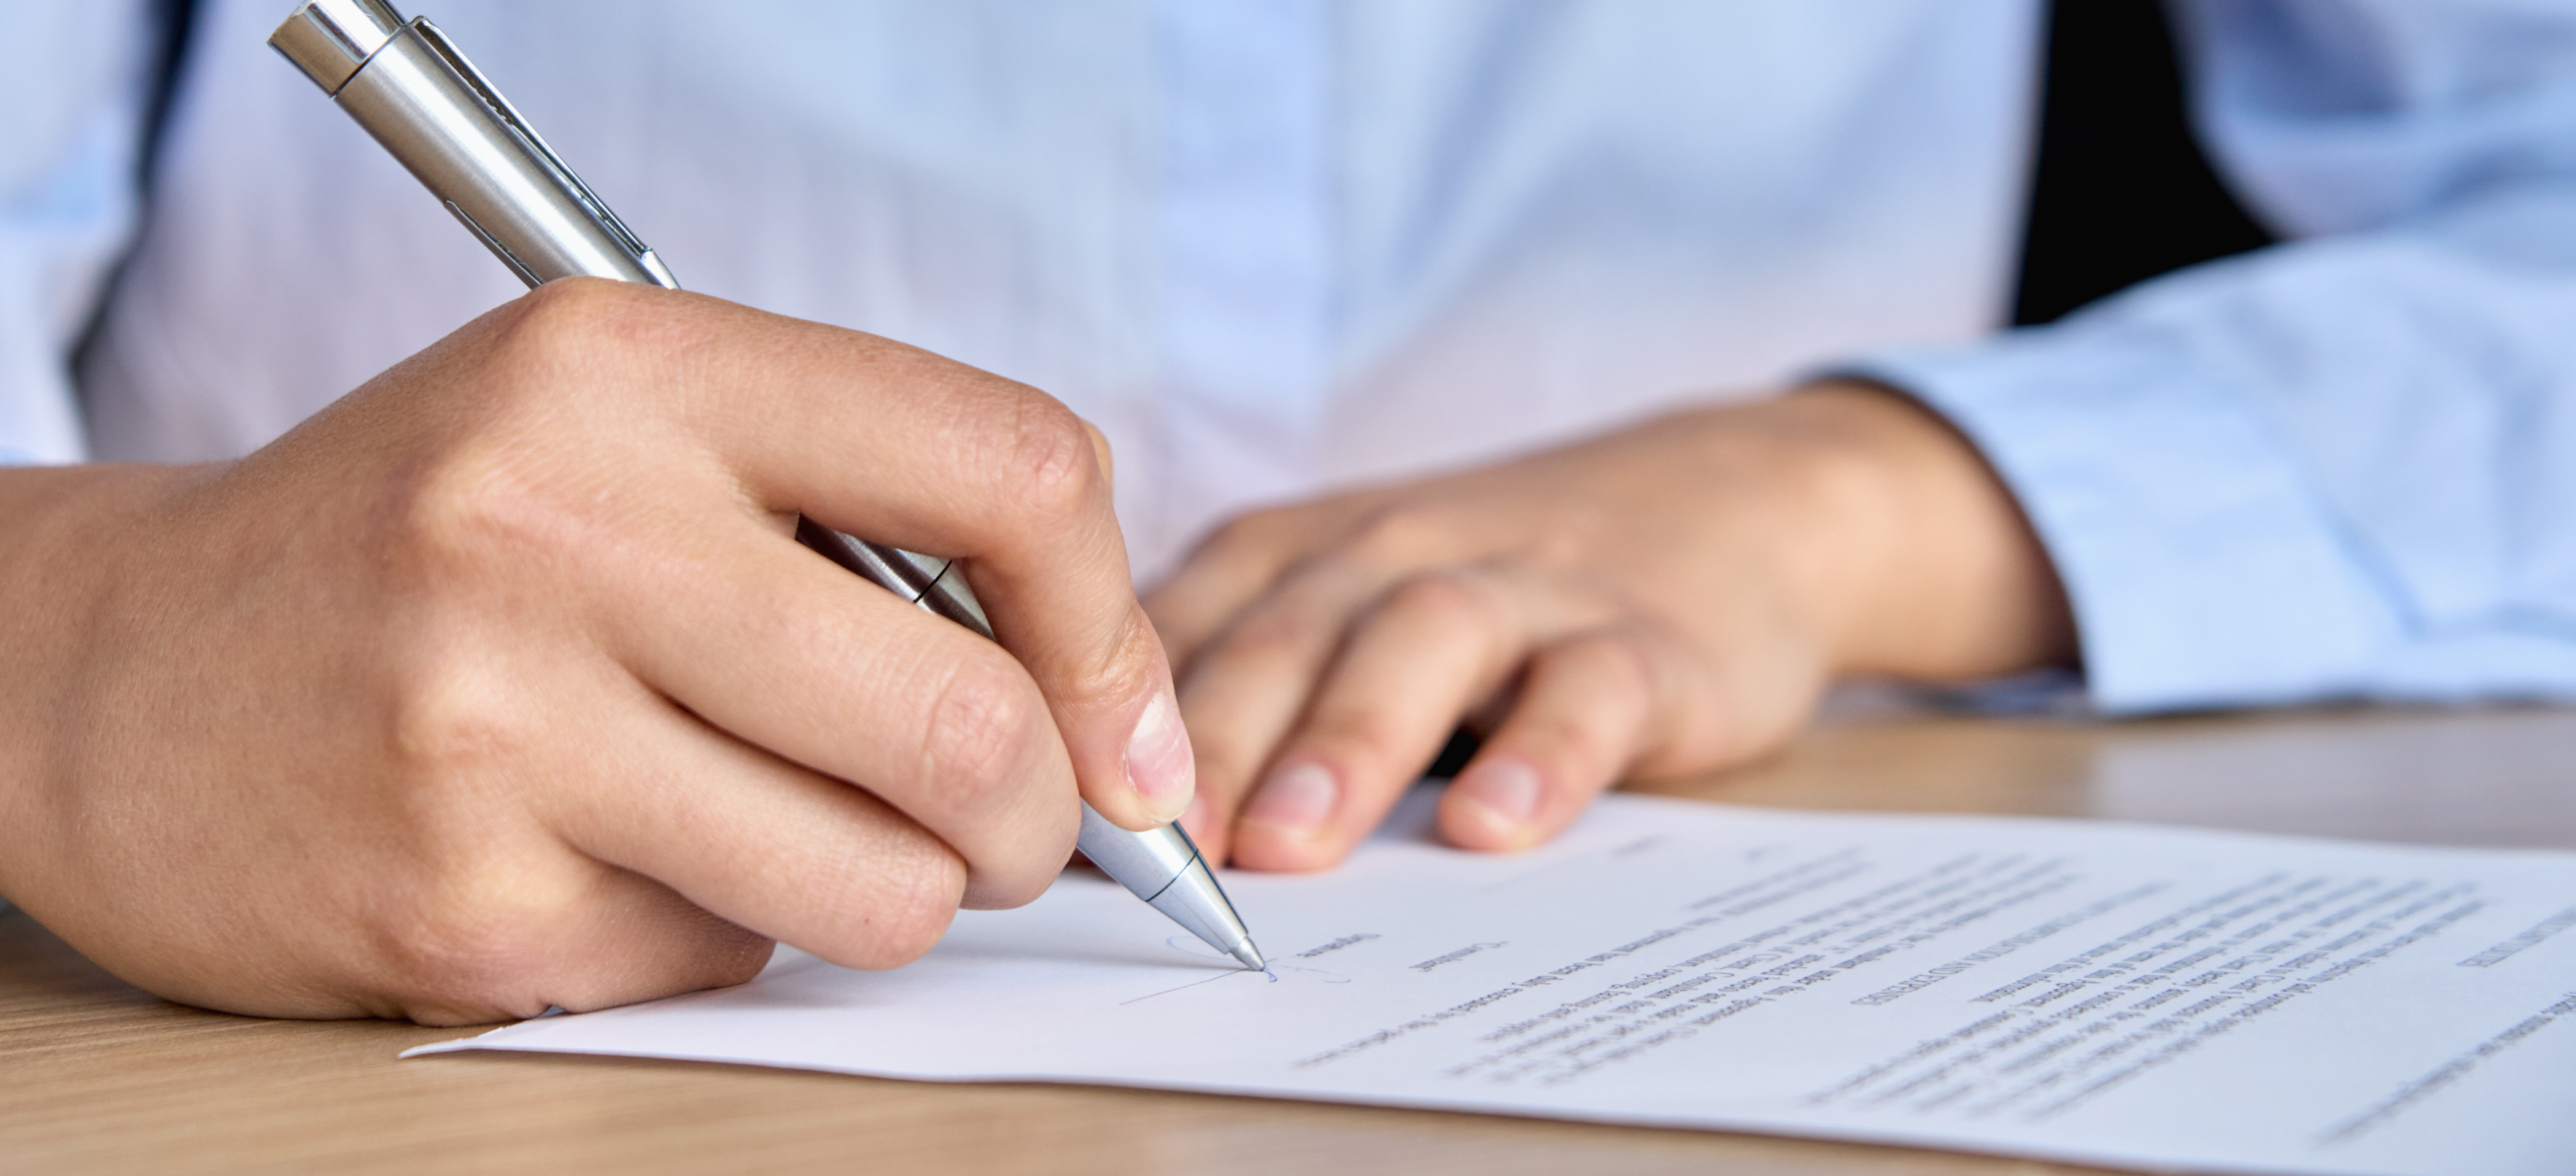 A person wearing a blue shirt is signing a piece of paper using a silver pen.